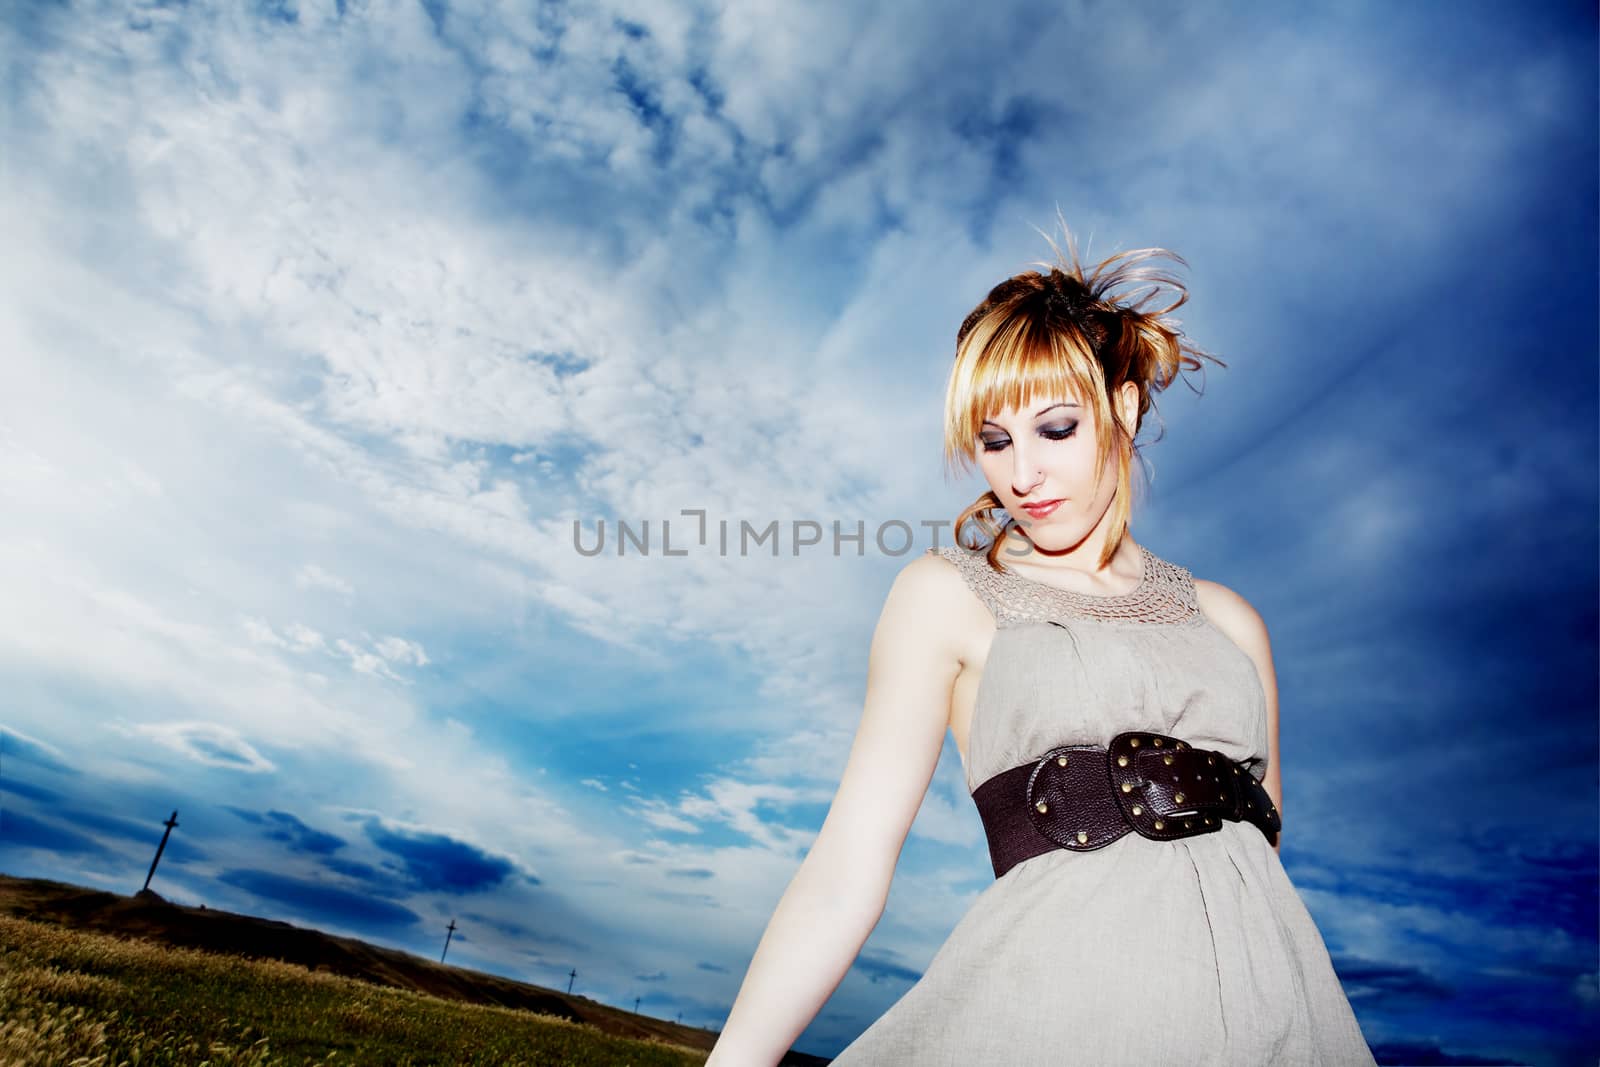 Fashion. Portrait girl outdoors wearing dress and belt with blue sky